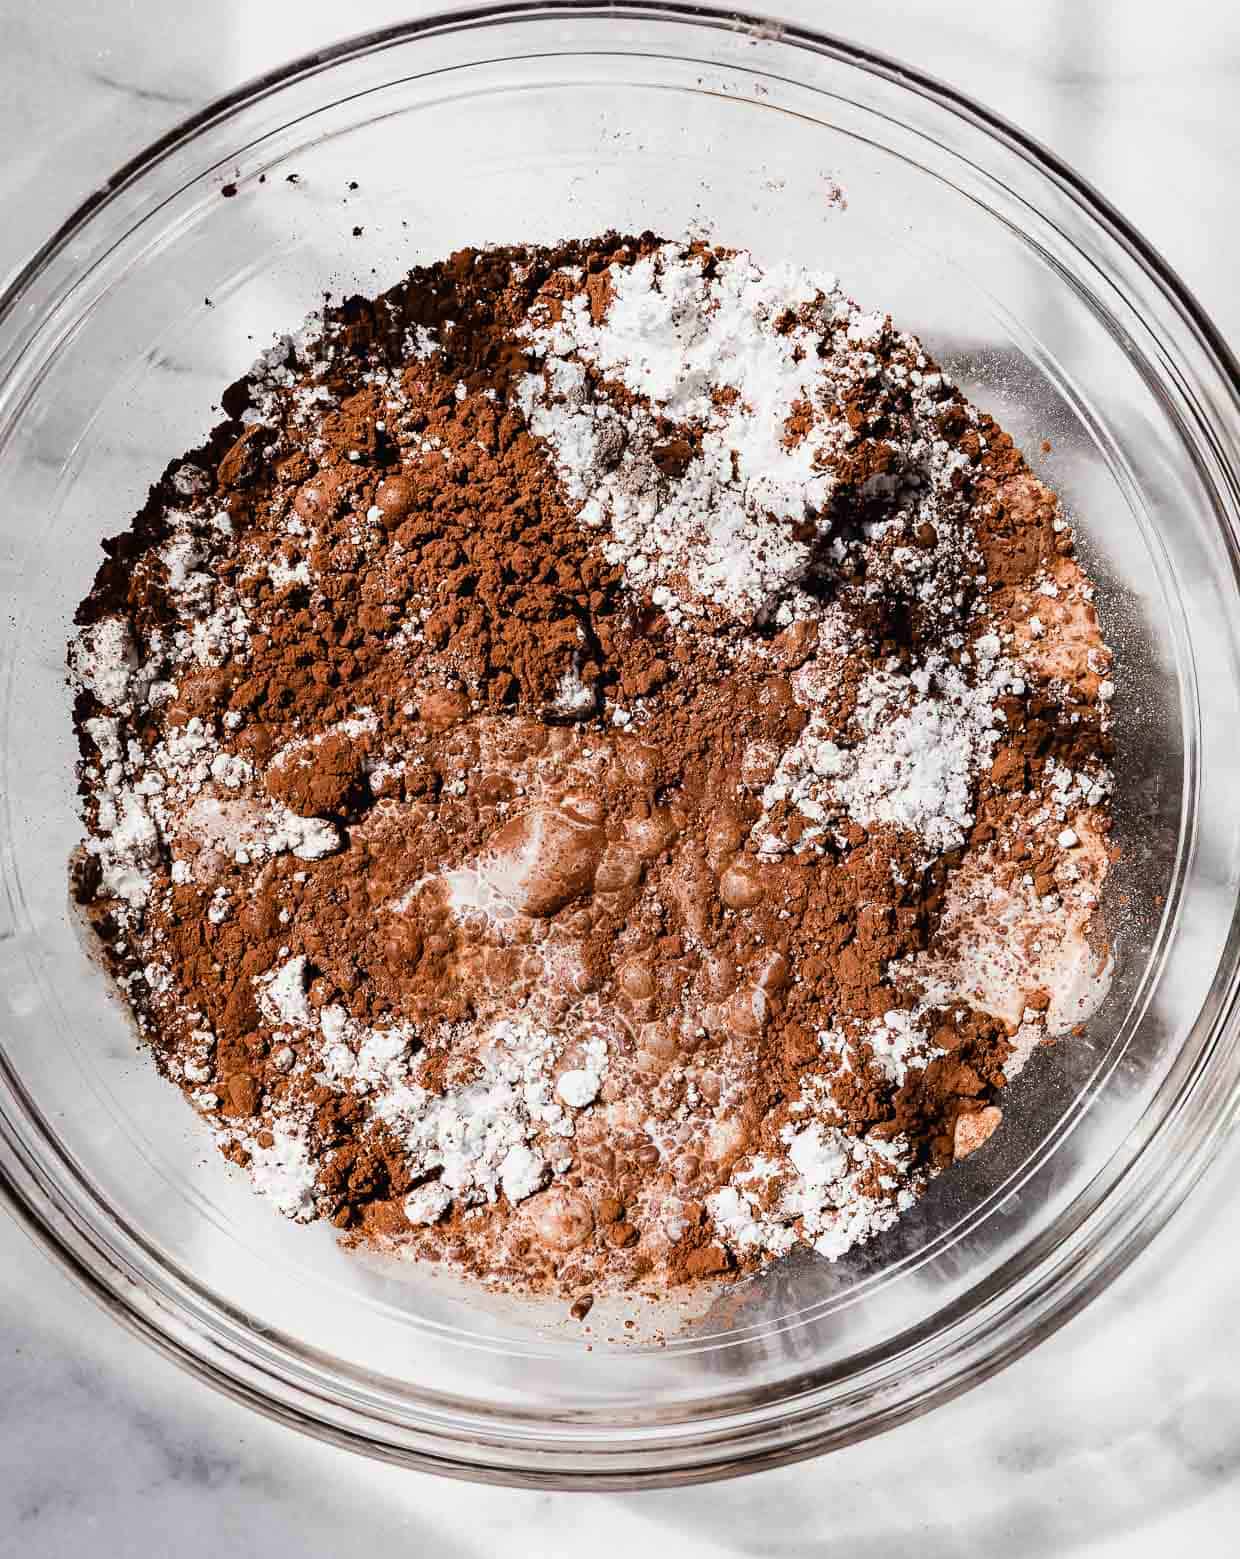 Cocoa powder, powdered sugar, and milk in a glass bowl on a marble background.